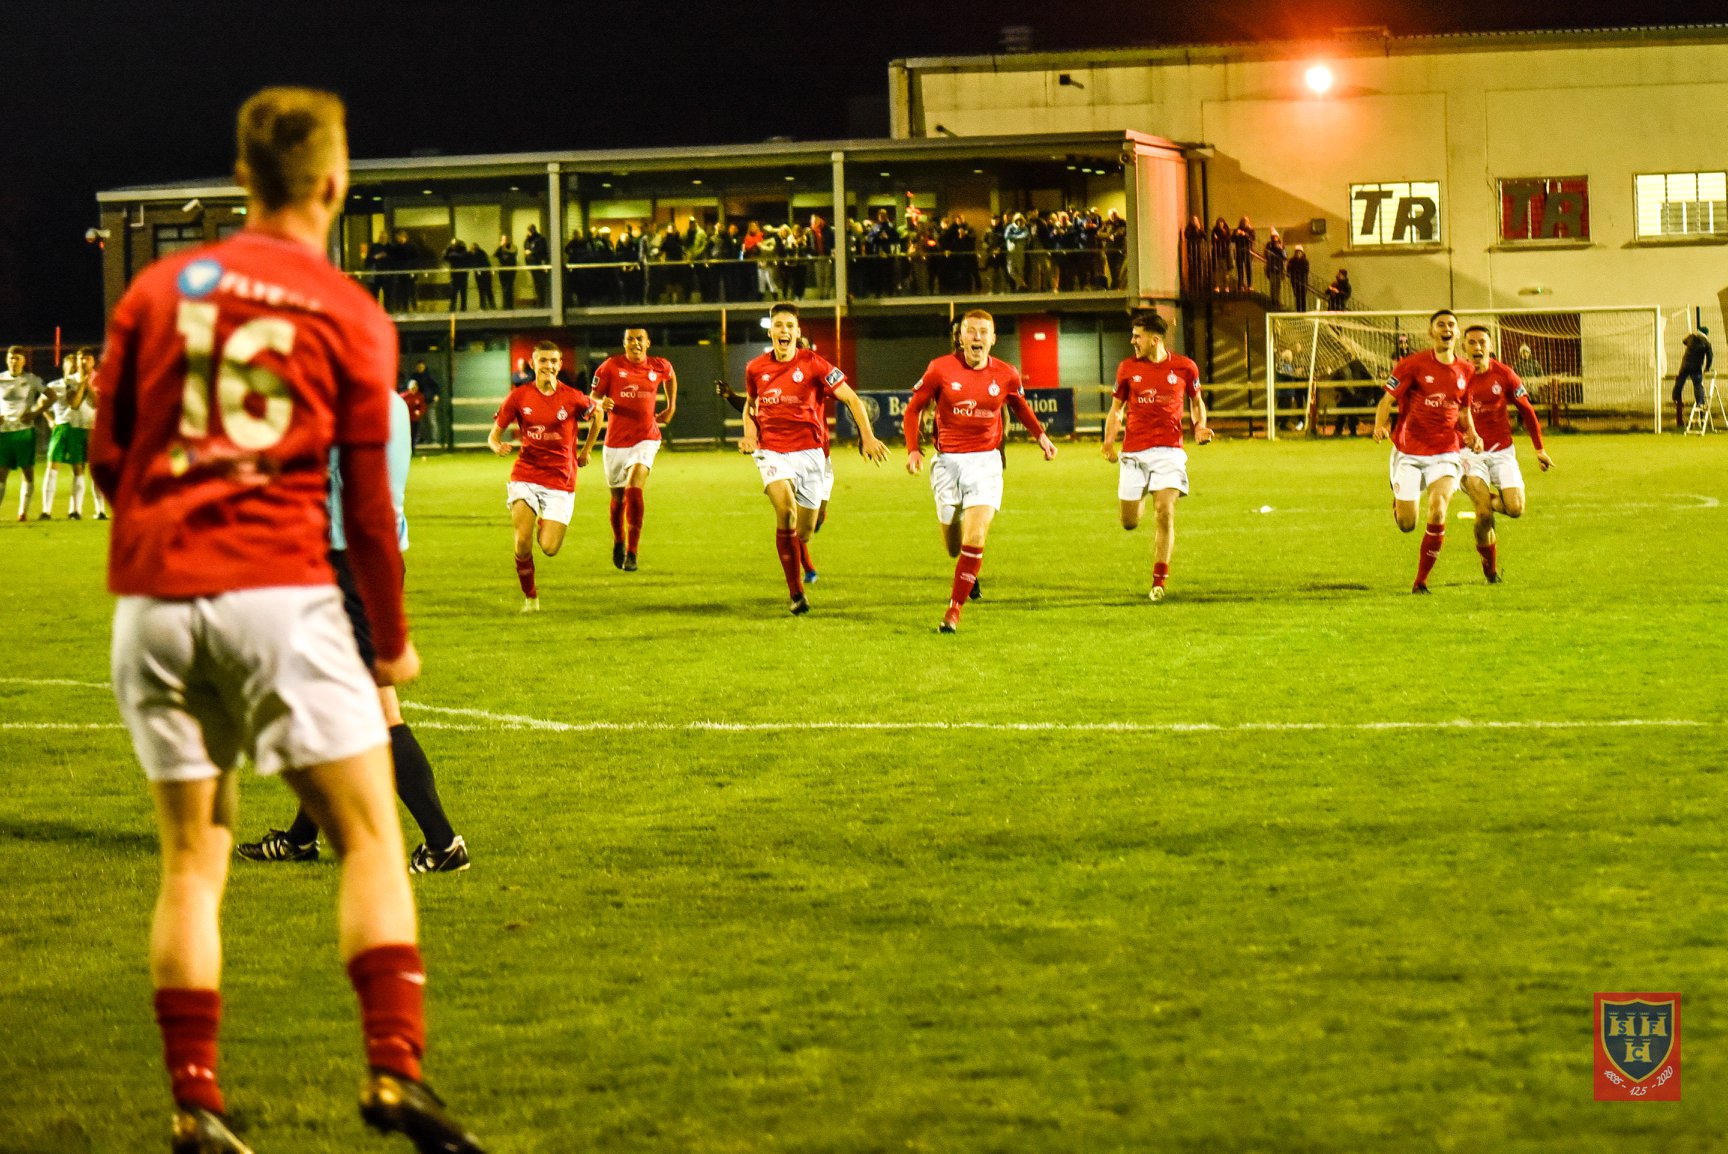 Applications invited for Shelbourne League of Ireland U19 manager